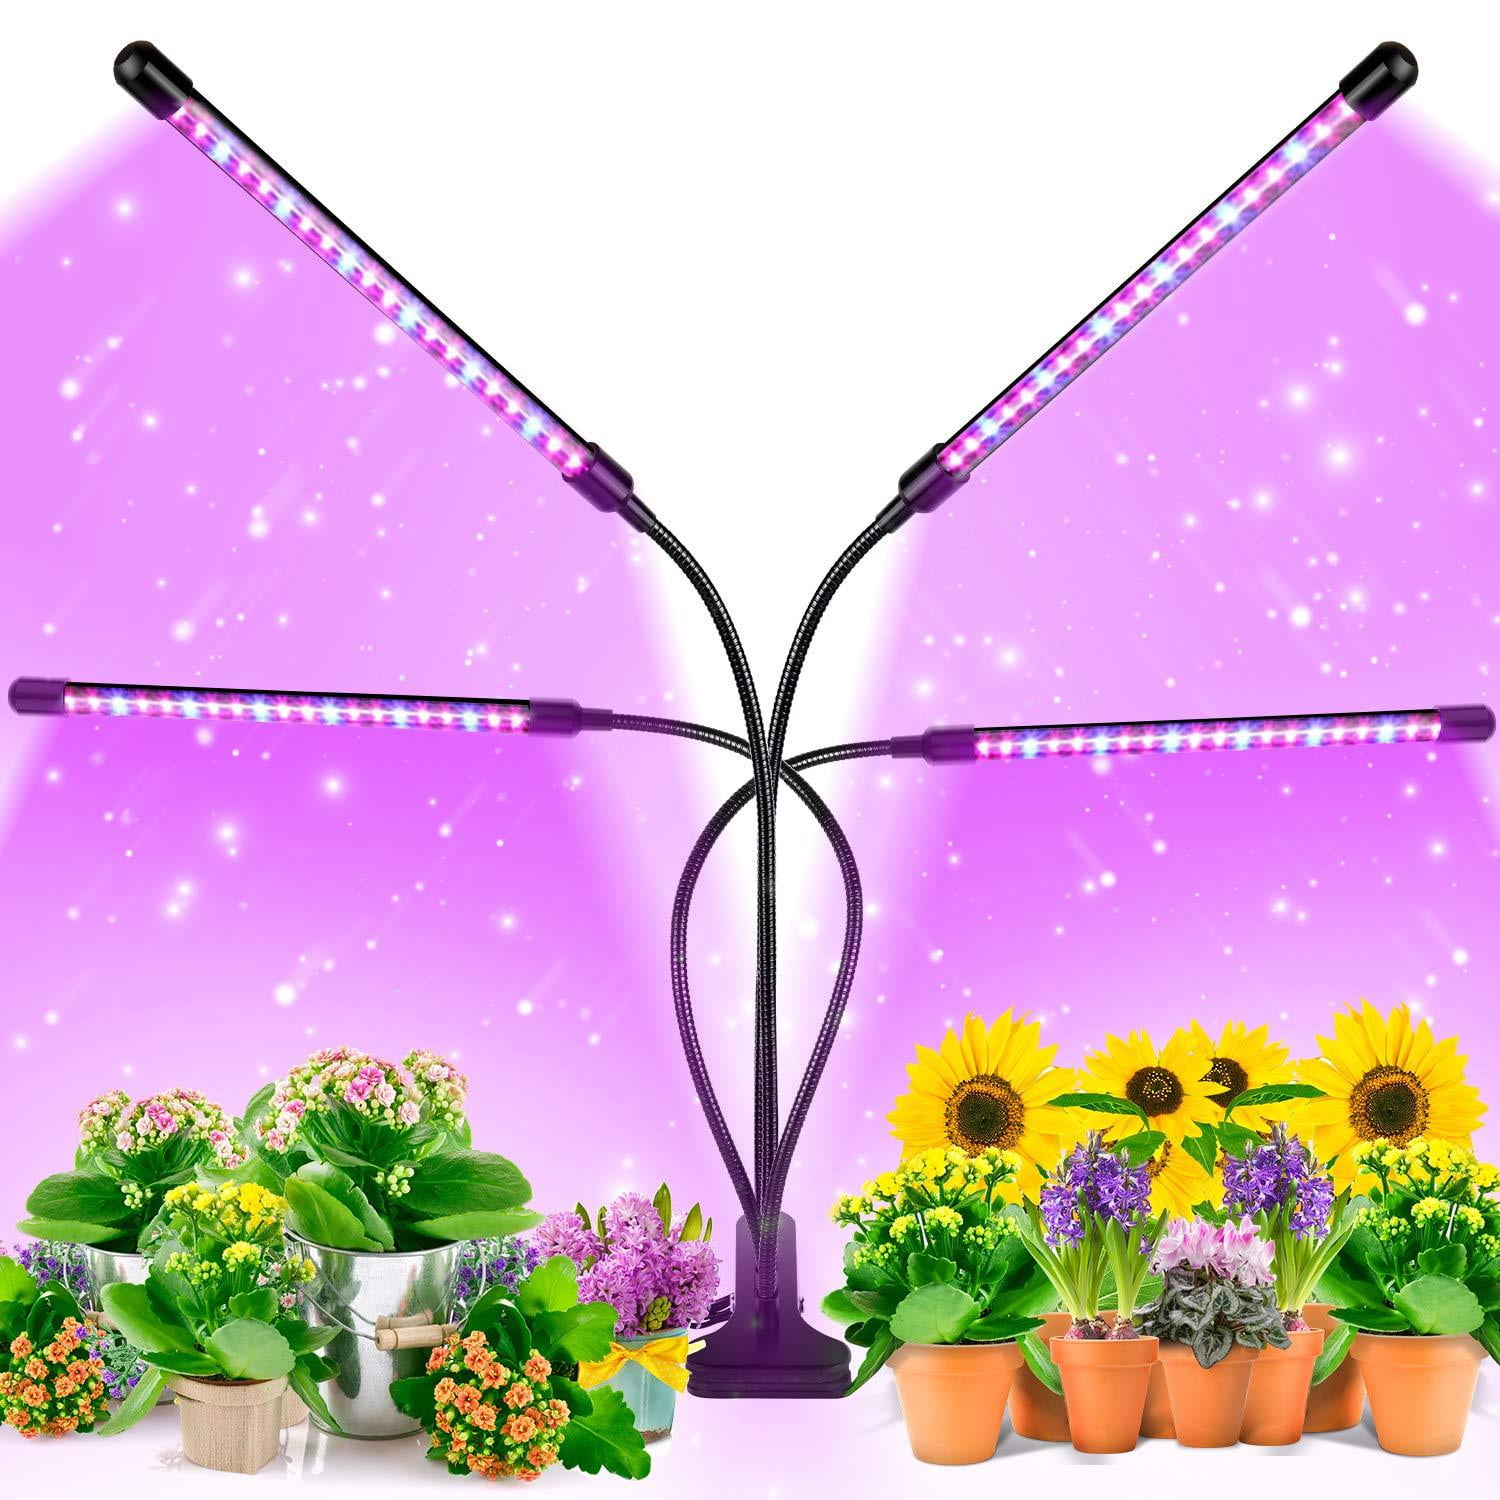 28w Hydroponic LED Grow Light Plant Grow Lights E27 Growing Lamp For Garden BV 